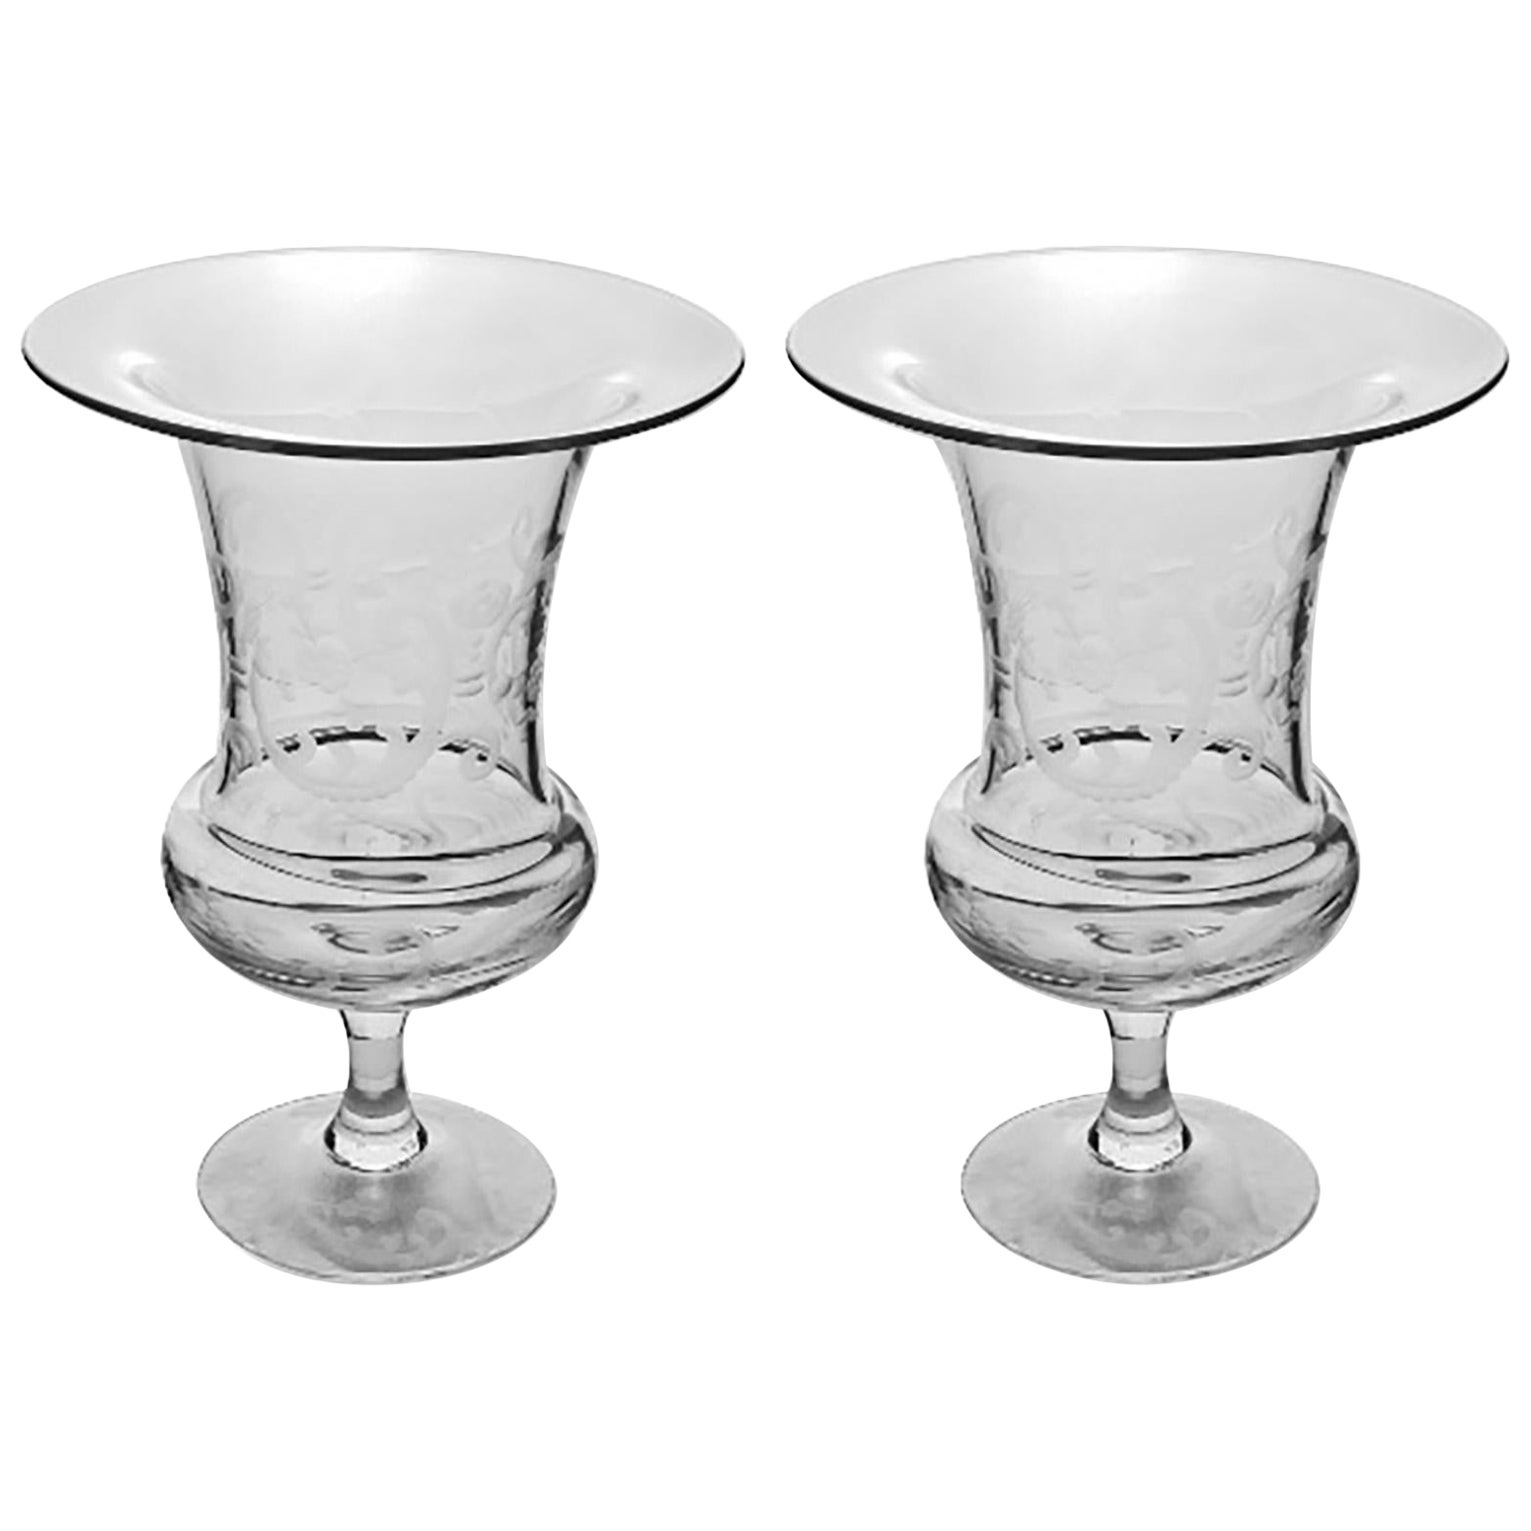 Pair of decorated glass vases 